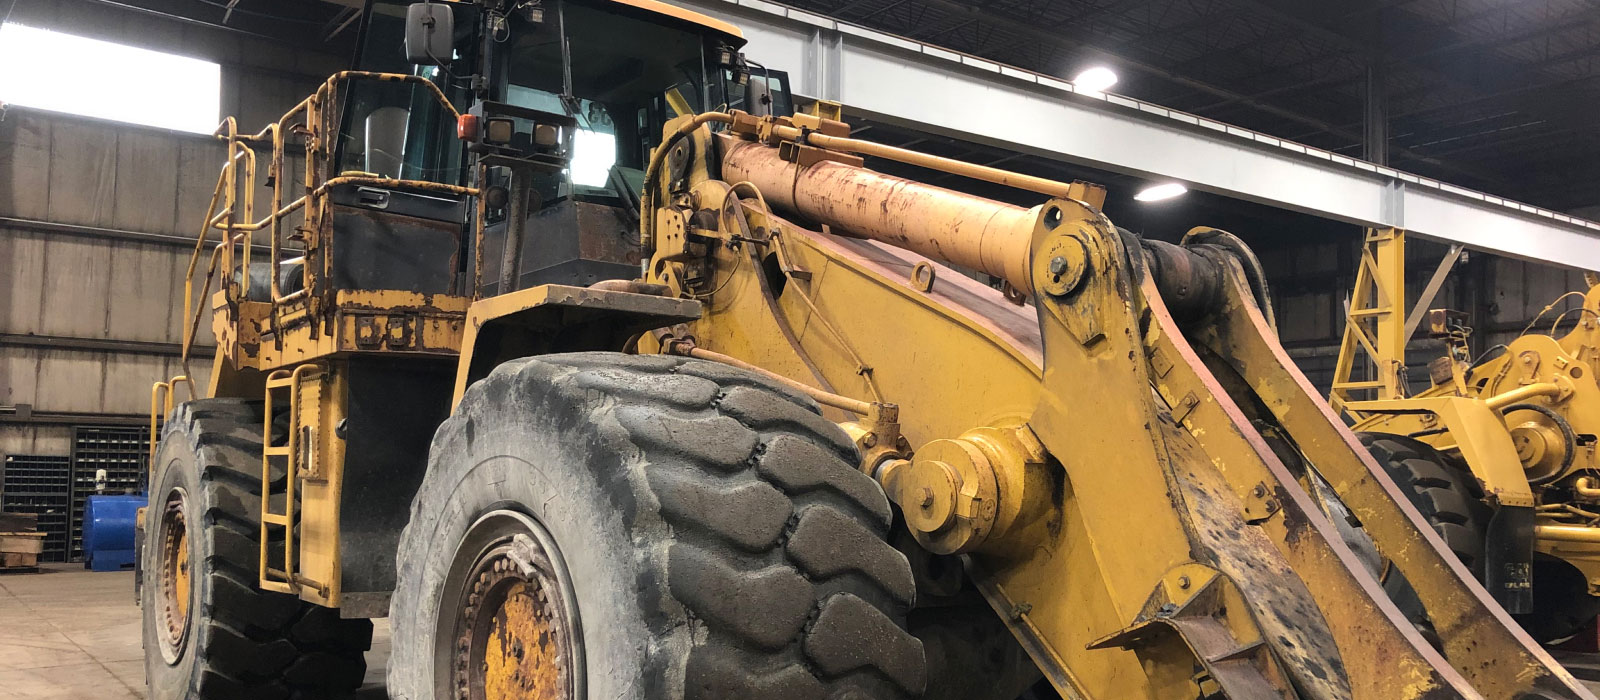 A Glance At The Initial Heavy Equipment Rebuild Process At Bulk Equipment Corp.